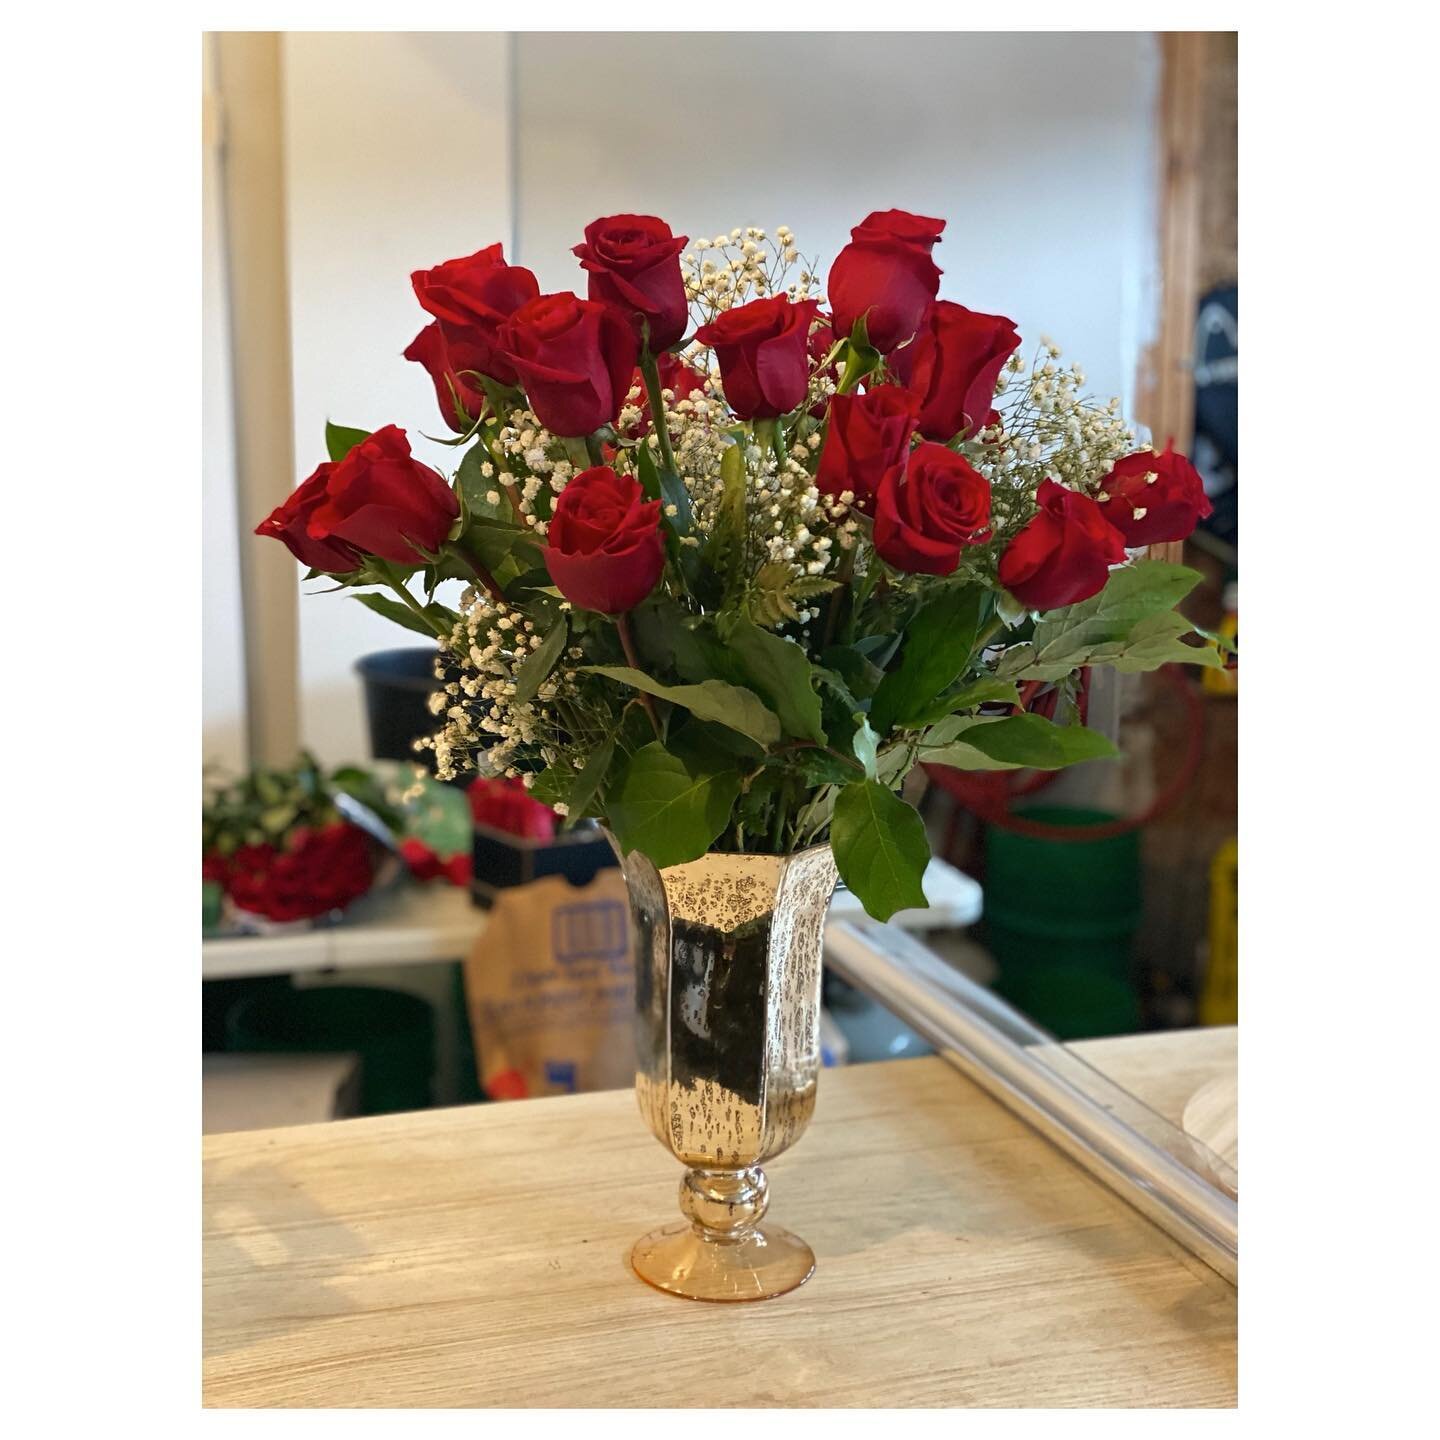 Two Dozen, Long Stem Premium Red Roses - beautifully arranged in a shimmery gold vessel &hearts;️ Our new collection is launching soon, stay tuned...
. 
S h o p 🌹 O n l i n e . at www.pinkpetals.ca (Click the Link in our Bio!)
.
Please contact Pink 